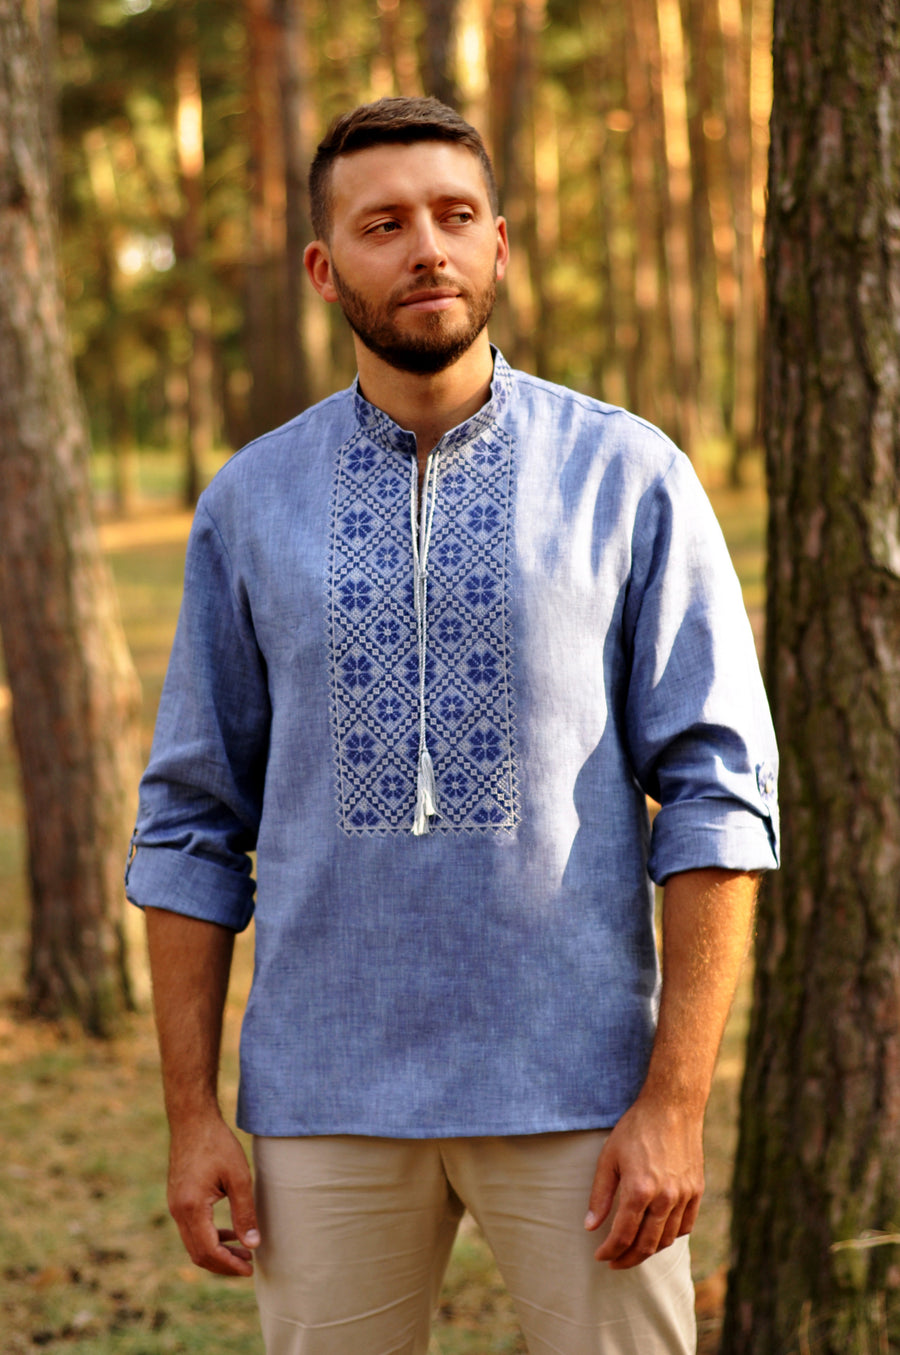 Embroidered men's shirt in denim style